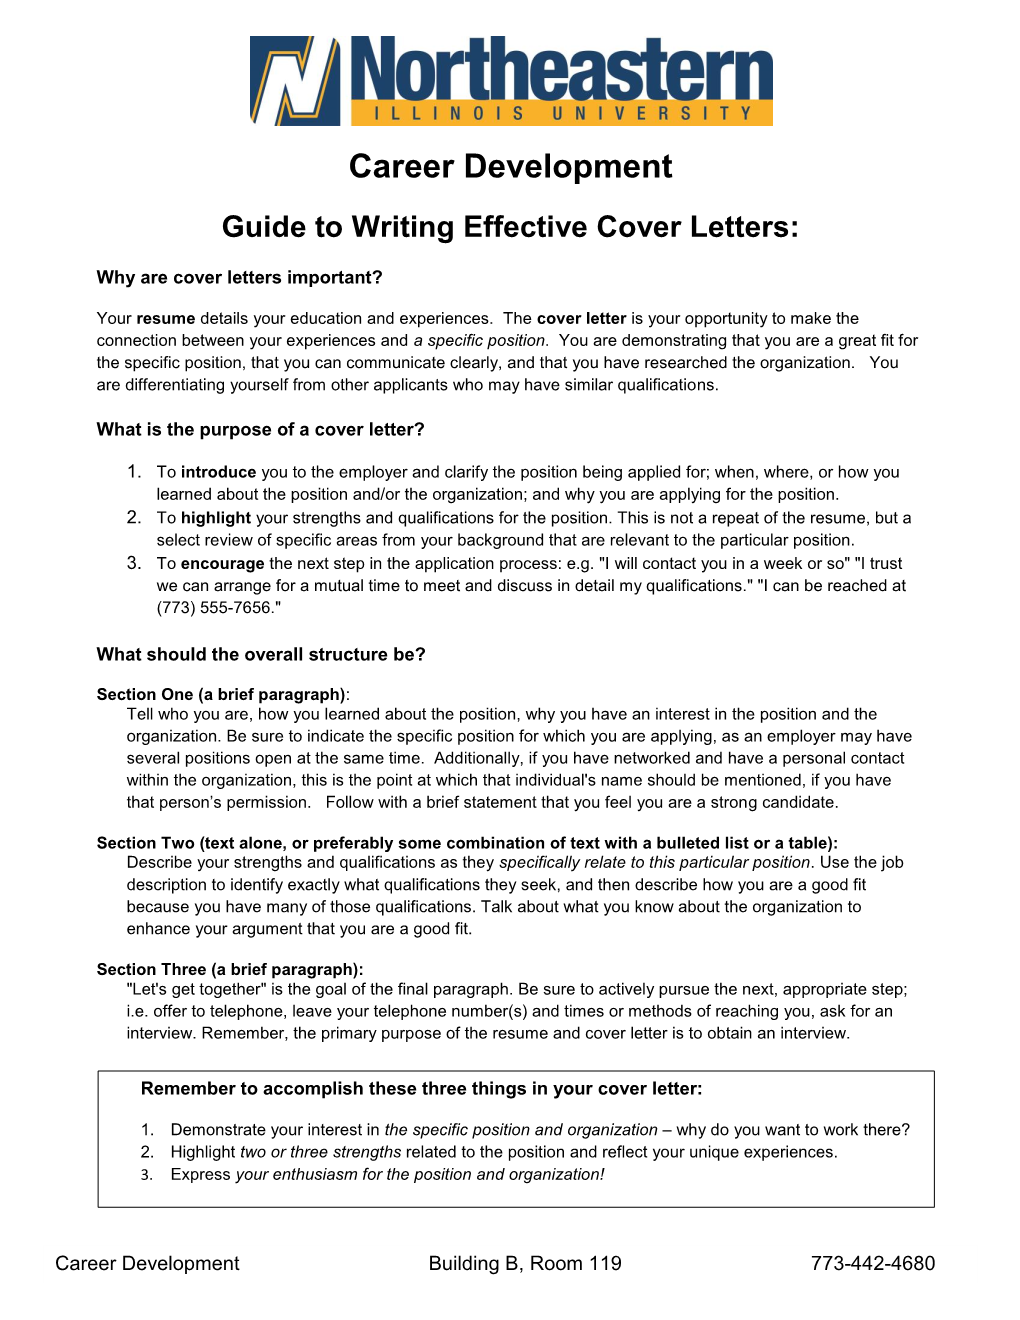 Guide to Writing Cover Letters